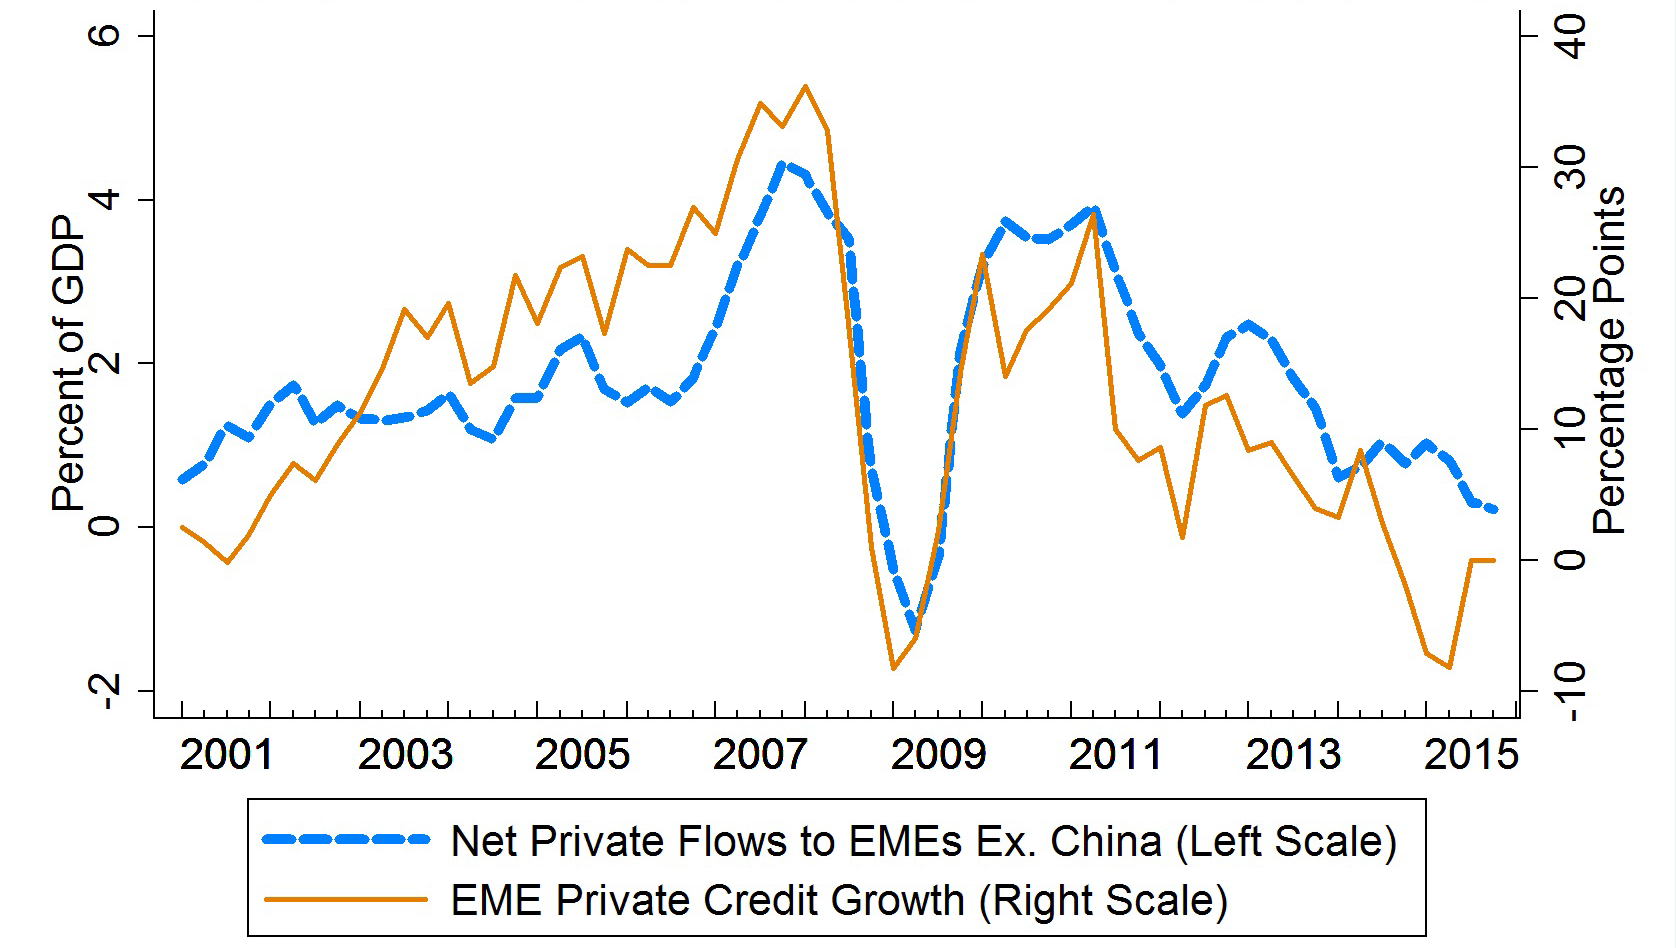 Chart 7: Net Private Flows and EME Credit Growth. See accessible link for data.